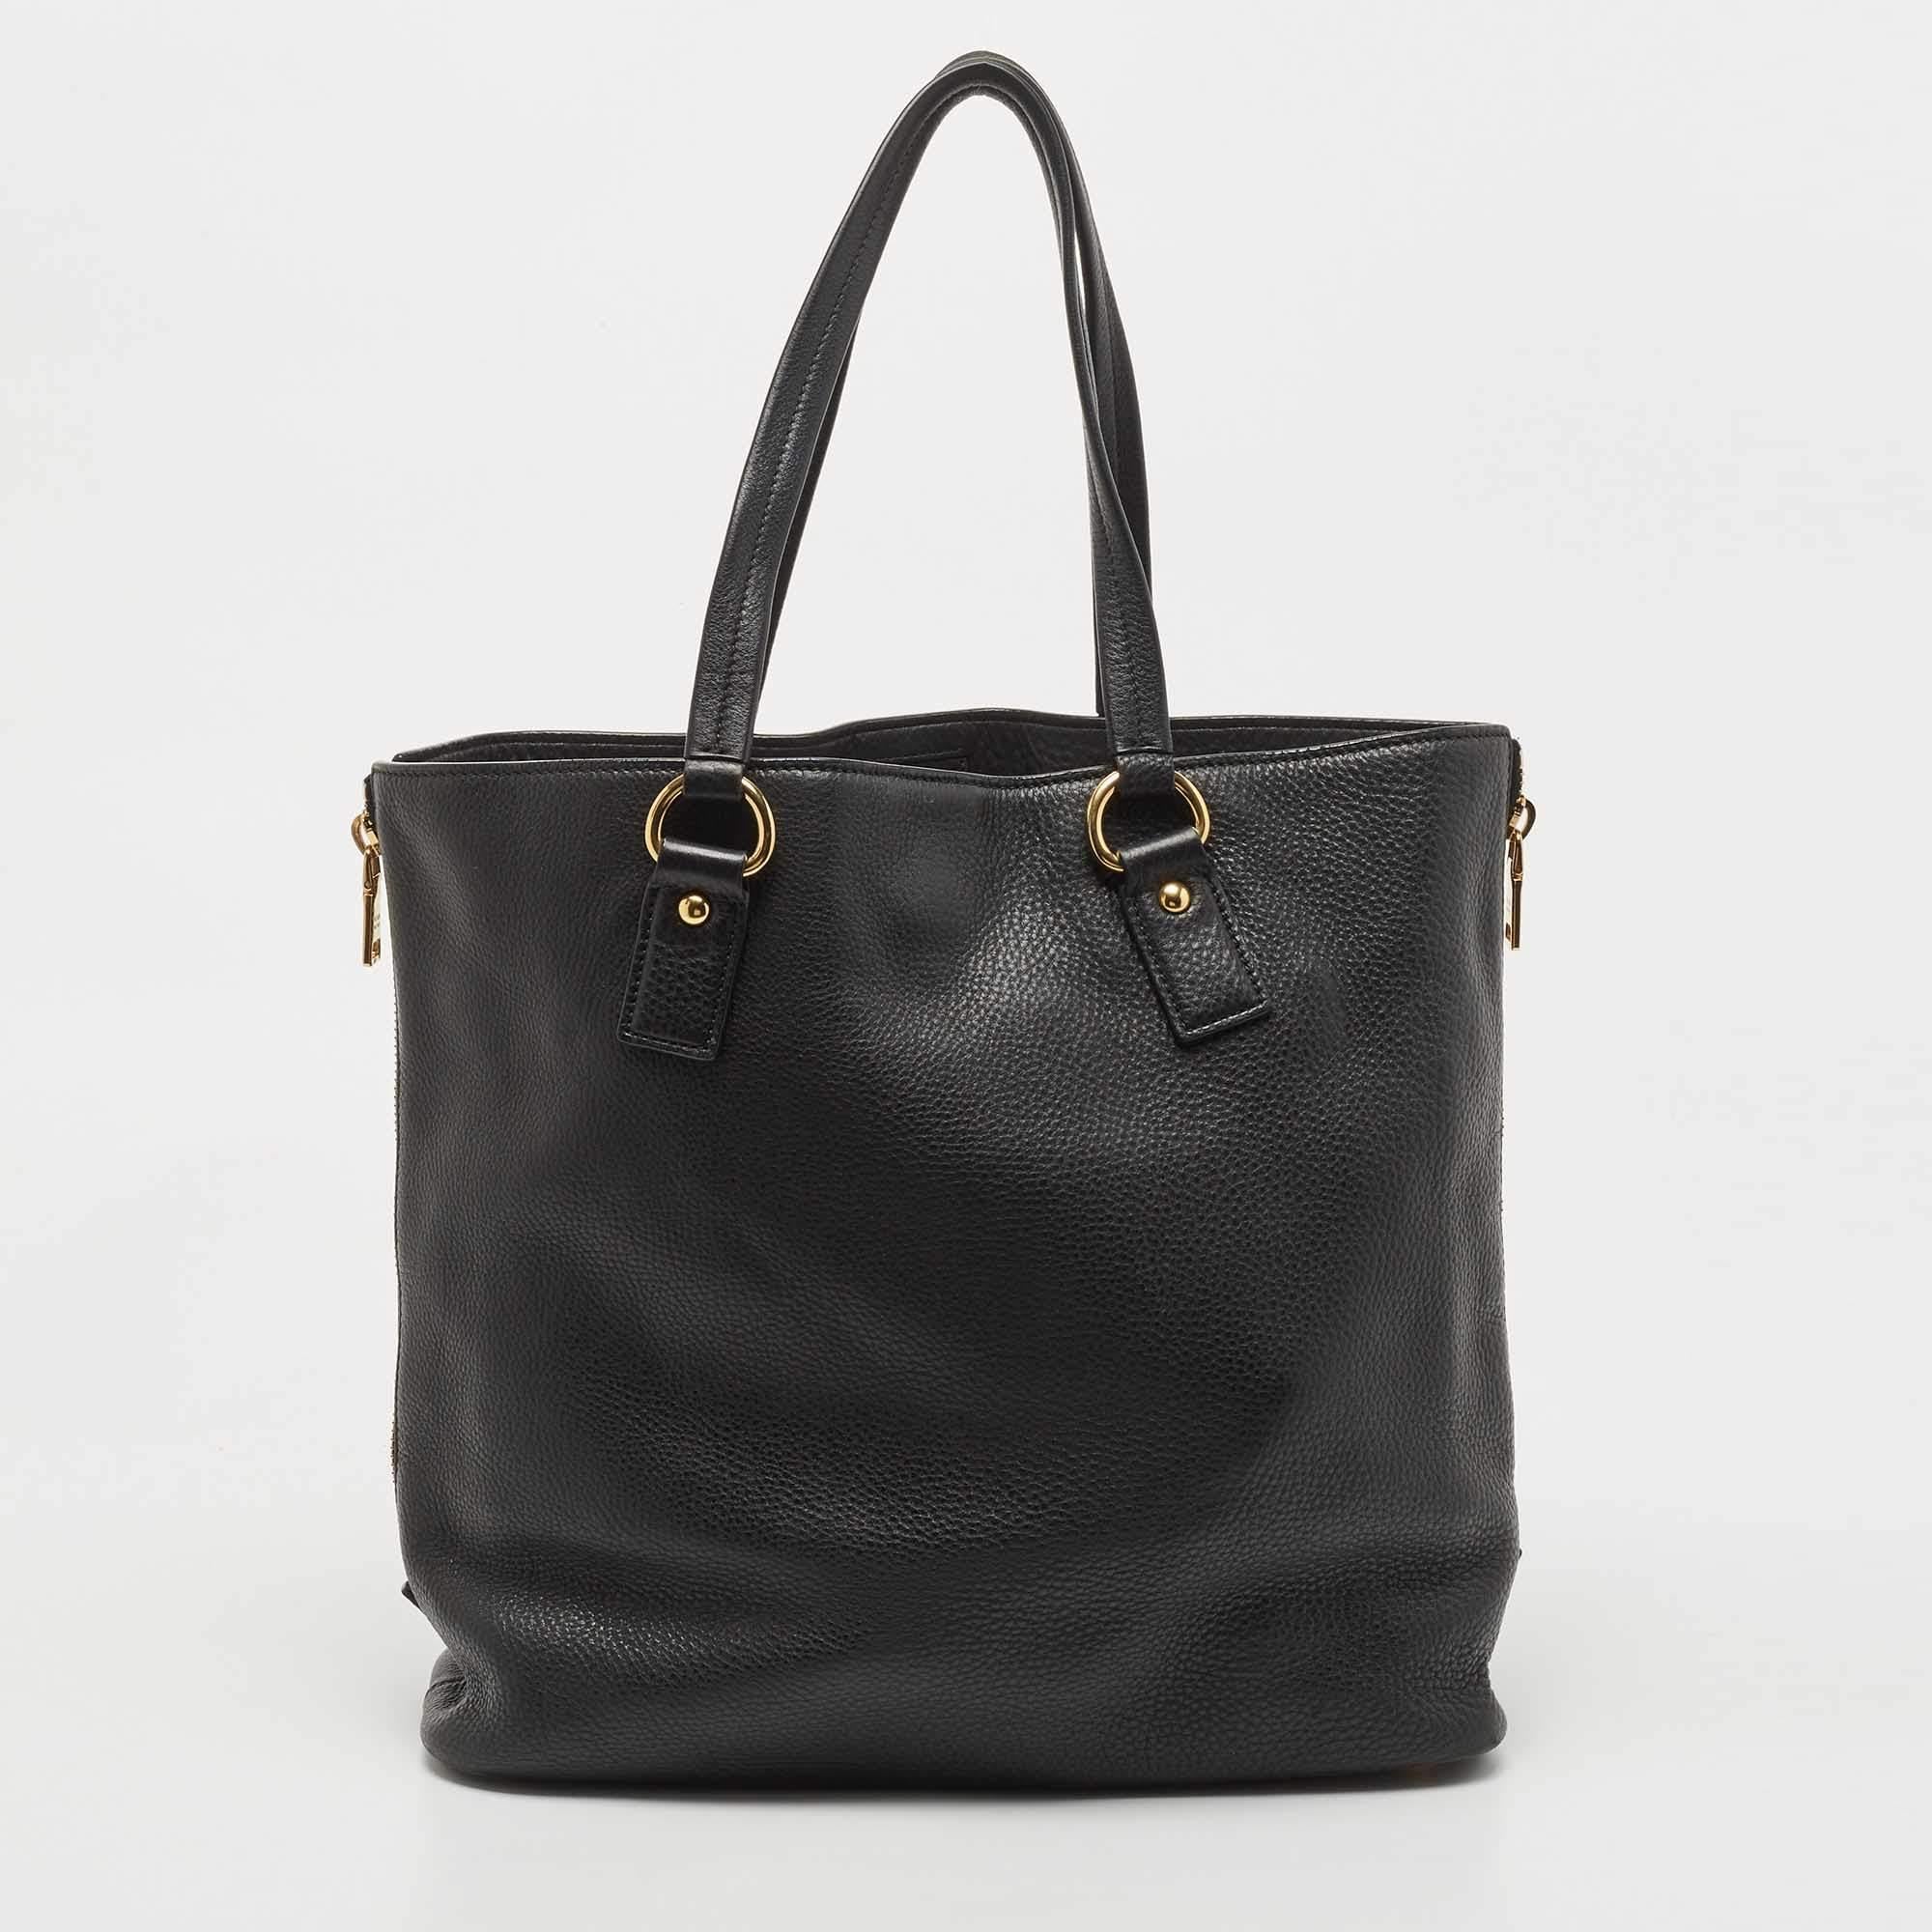 Striking a beautiful balance between essentiality and opulence, this black shopping tote from the House of Prada ensures that your handbag requirements are taken care of. It is equipped with practical features for all-day ease.

Includes: Original